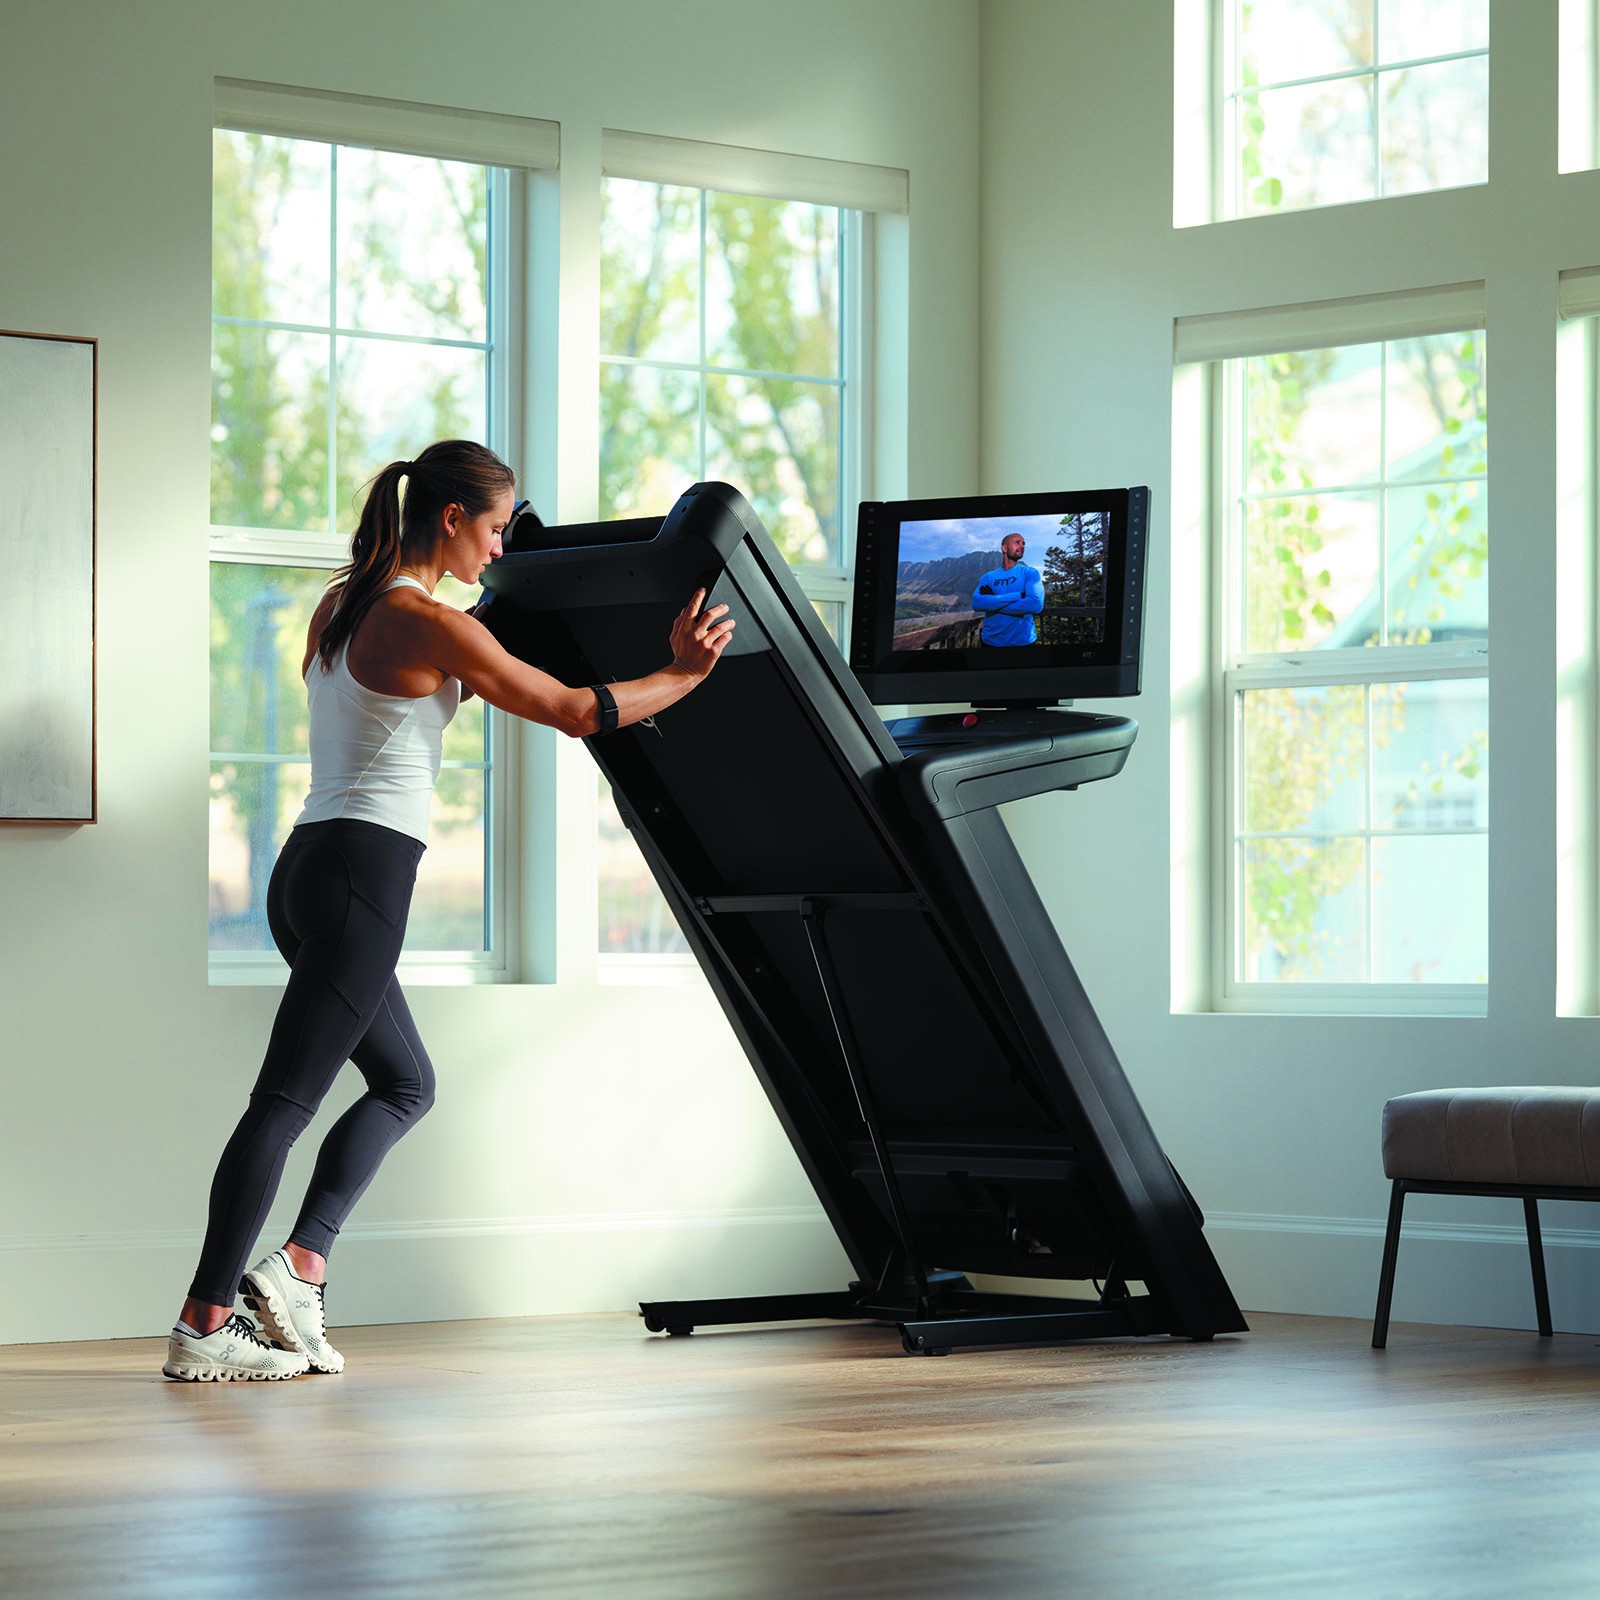 NordicTrack 2450 Treadmill – folding in home